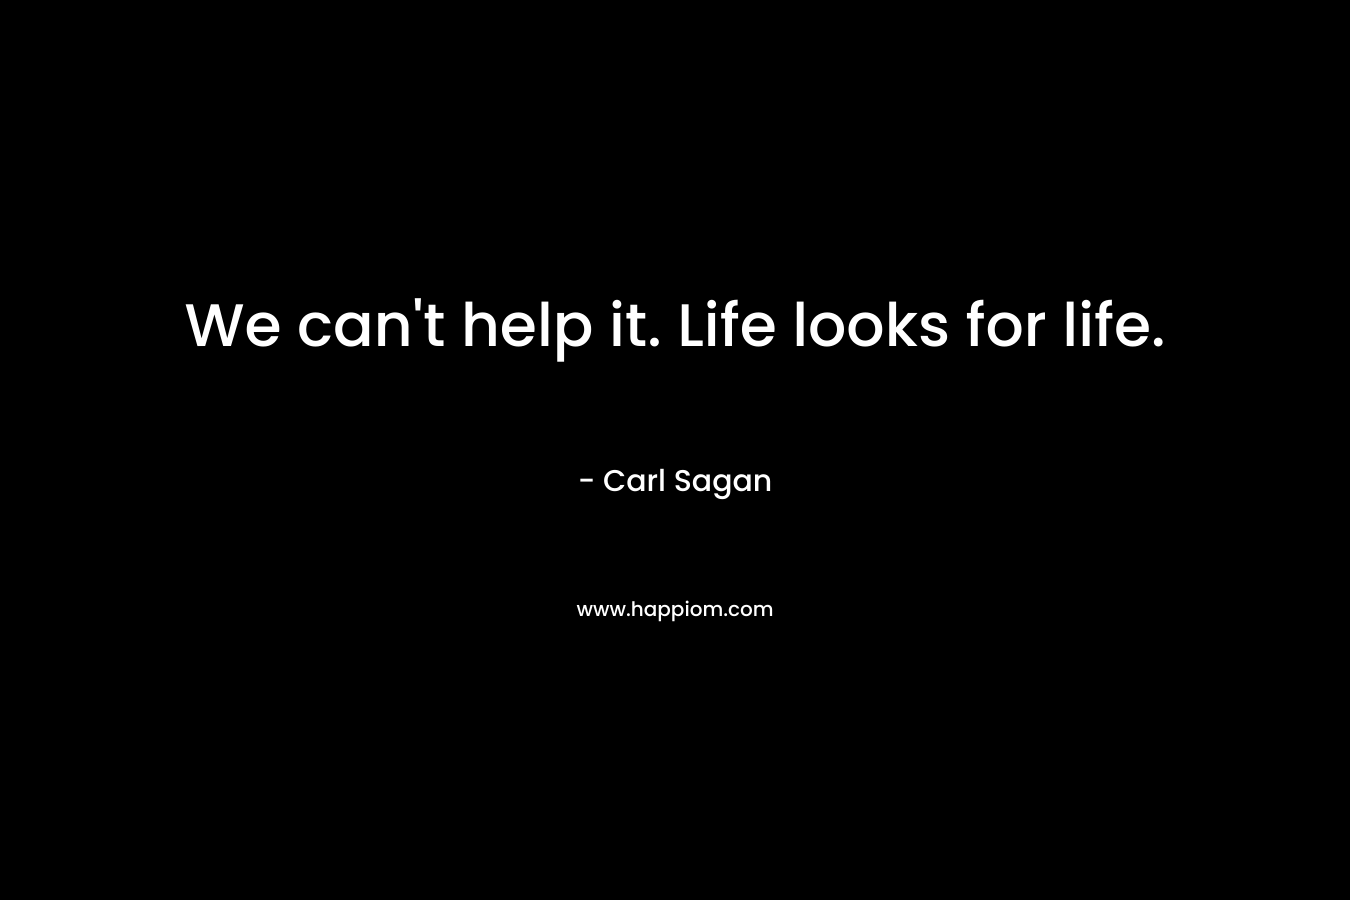 We can't help it. Life looks for life.